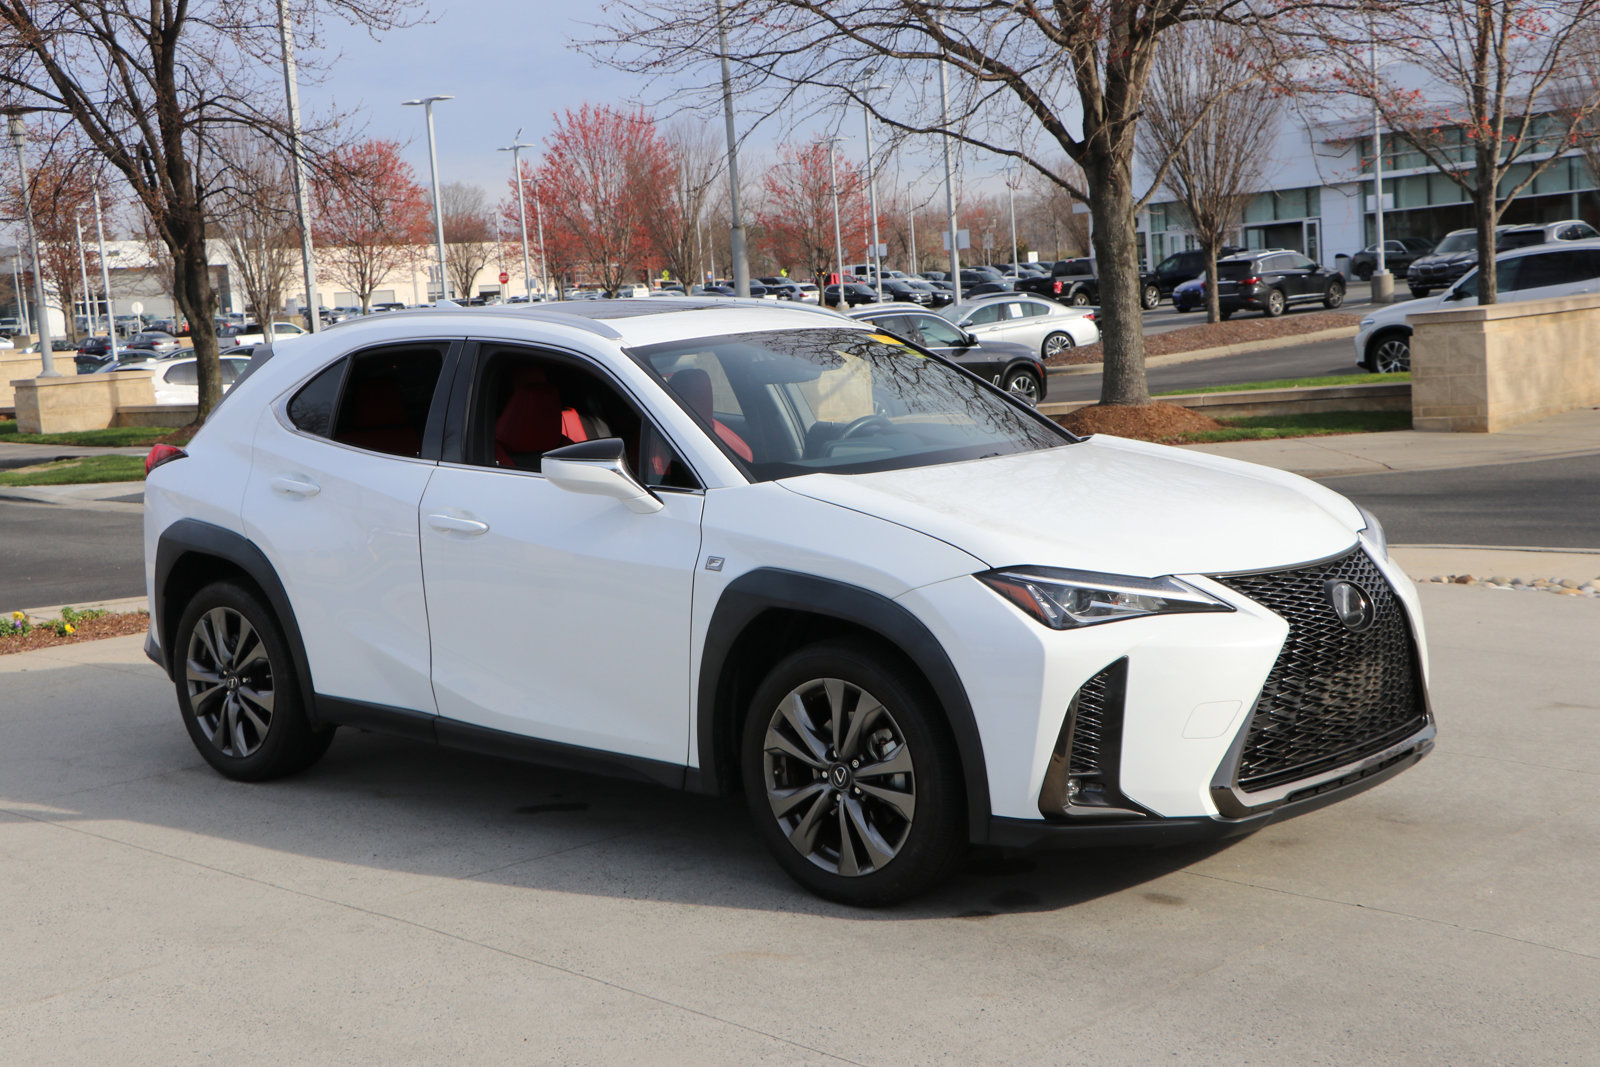 Certified Pre-Owned 2019 Lexus UX 200 F SPORT SUV in Cary #PN2649A |  Hendrick Dodge Cary